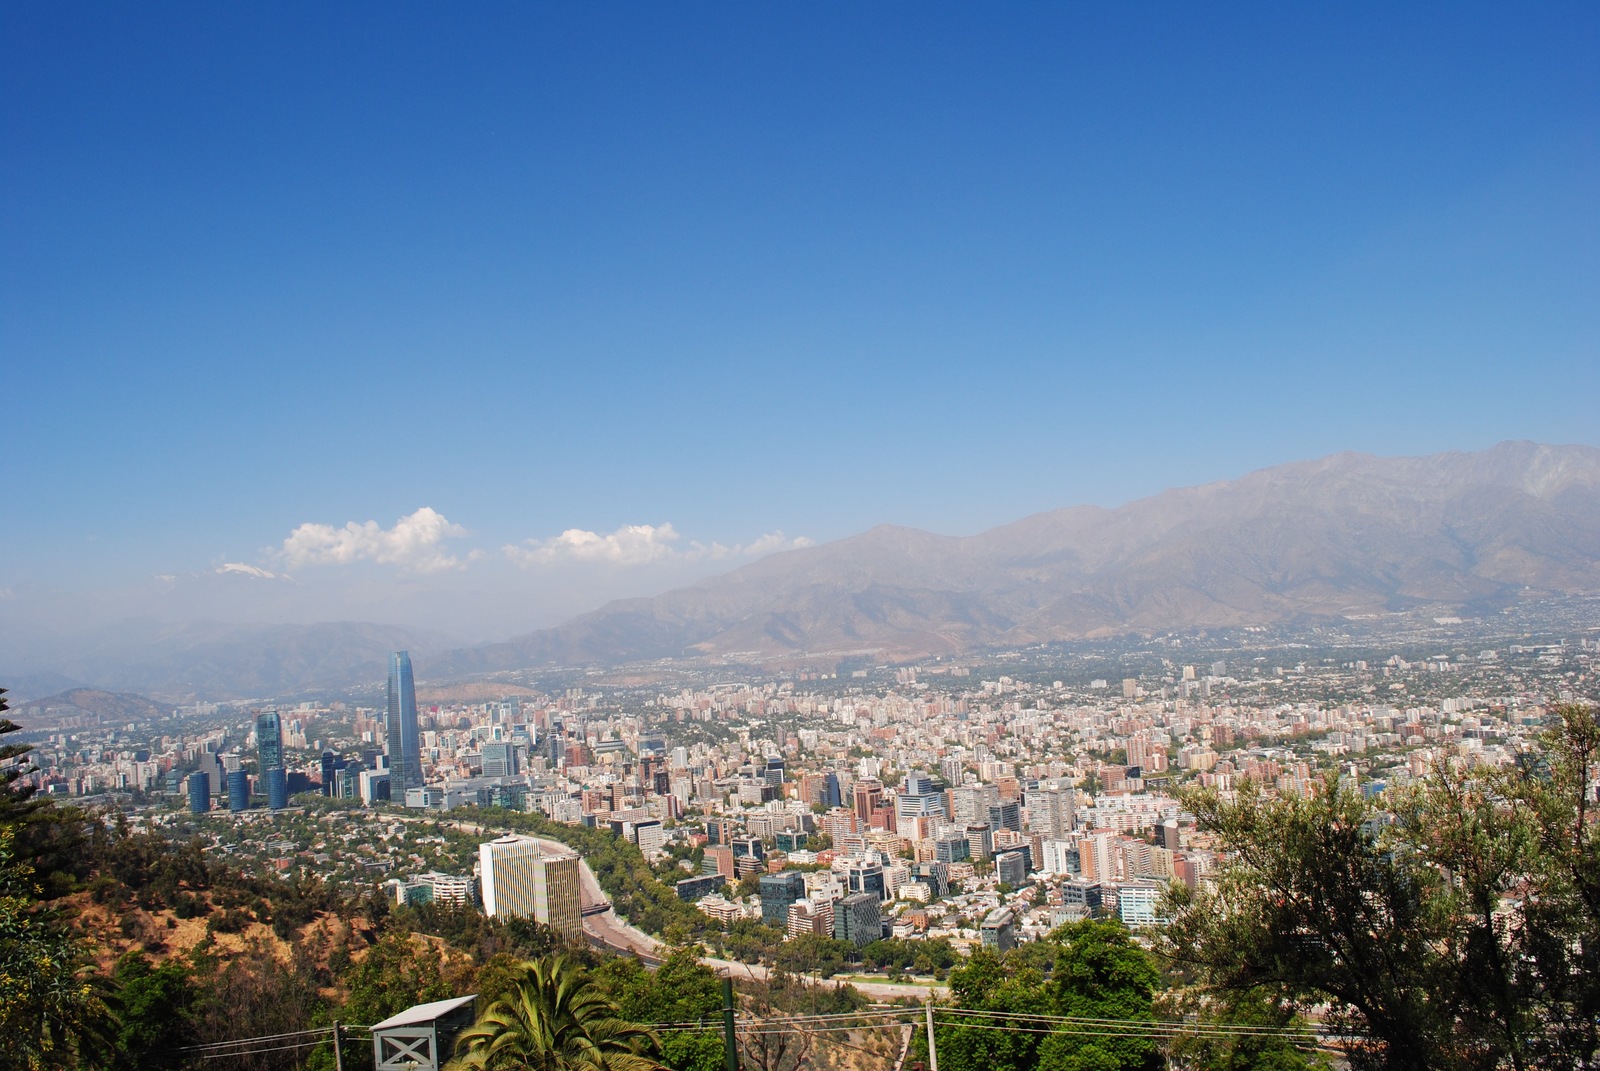 San Cristobal, Santiago, Chile - Longpost, The park, The hills, Santiago, Chile, The mountains, Travels, Latin America, South America, My